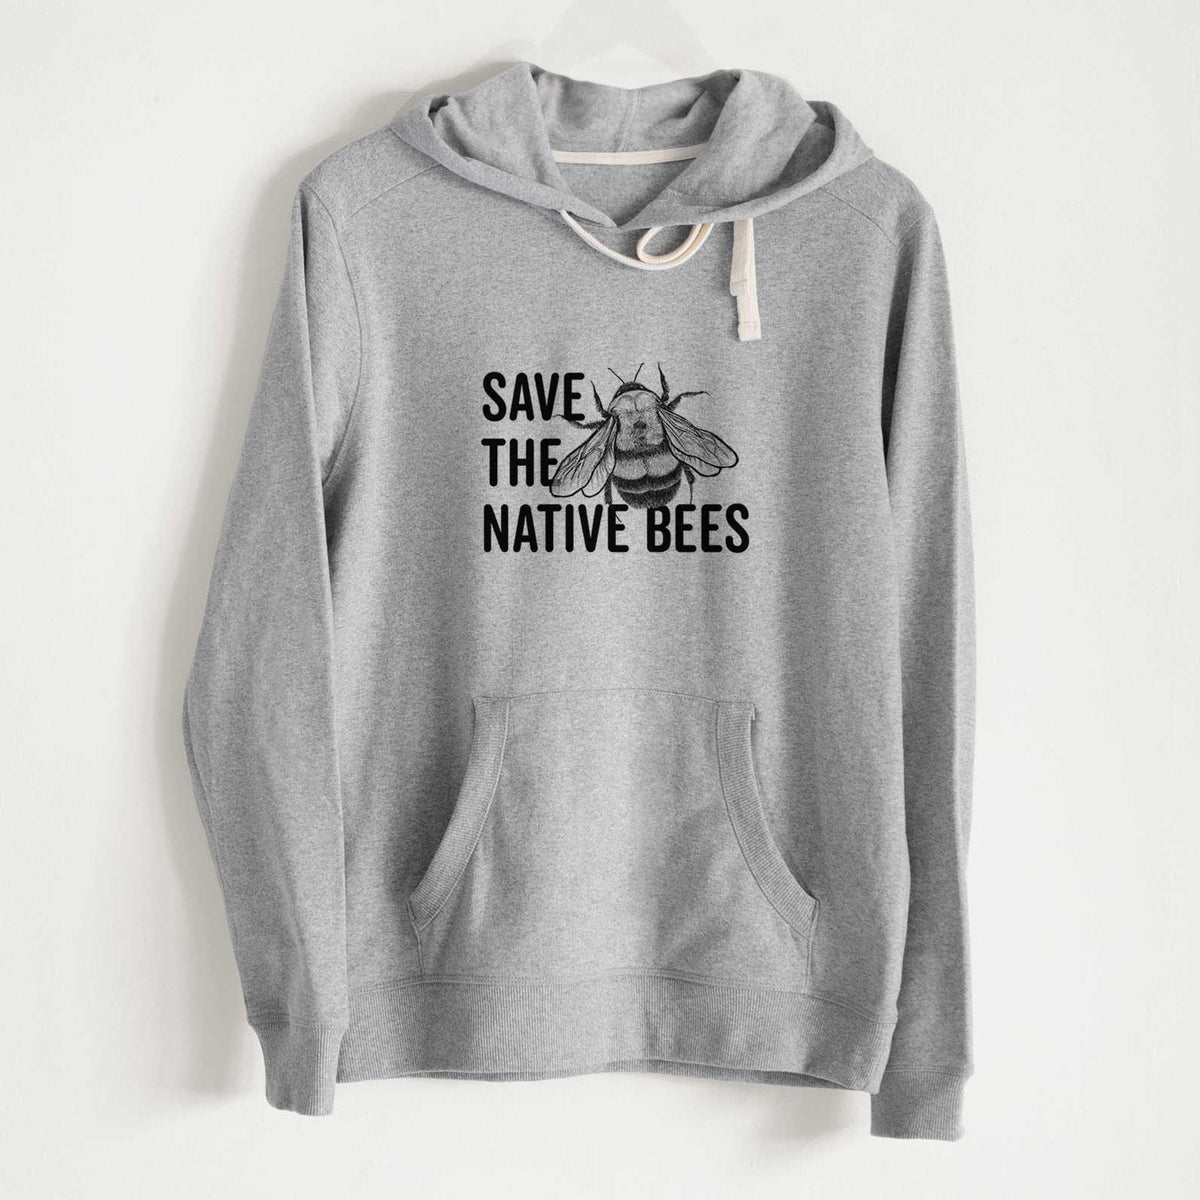 Save the Native Bees - Unisex Recycled Hoodie - CLOSEOUT - FINAL SALE